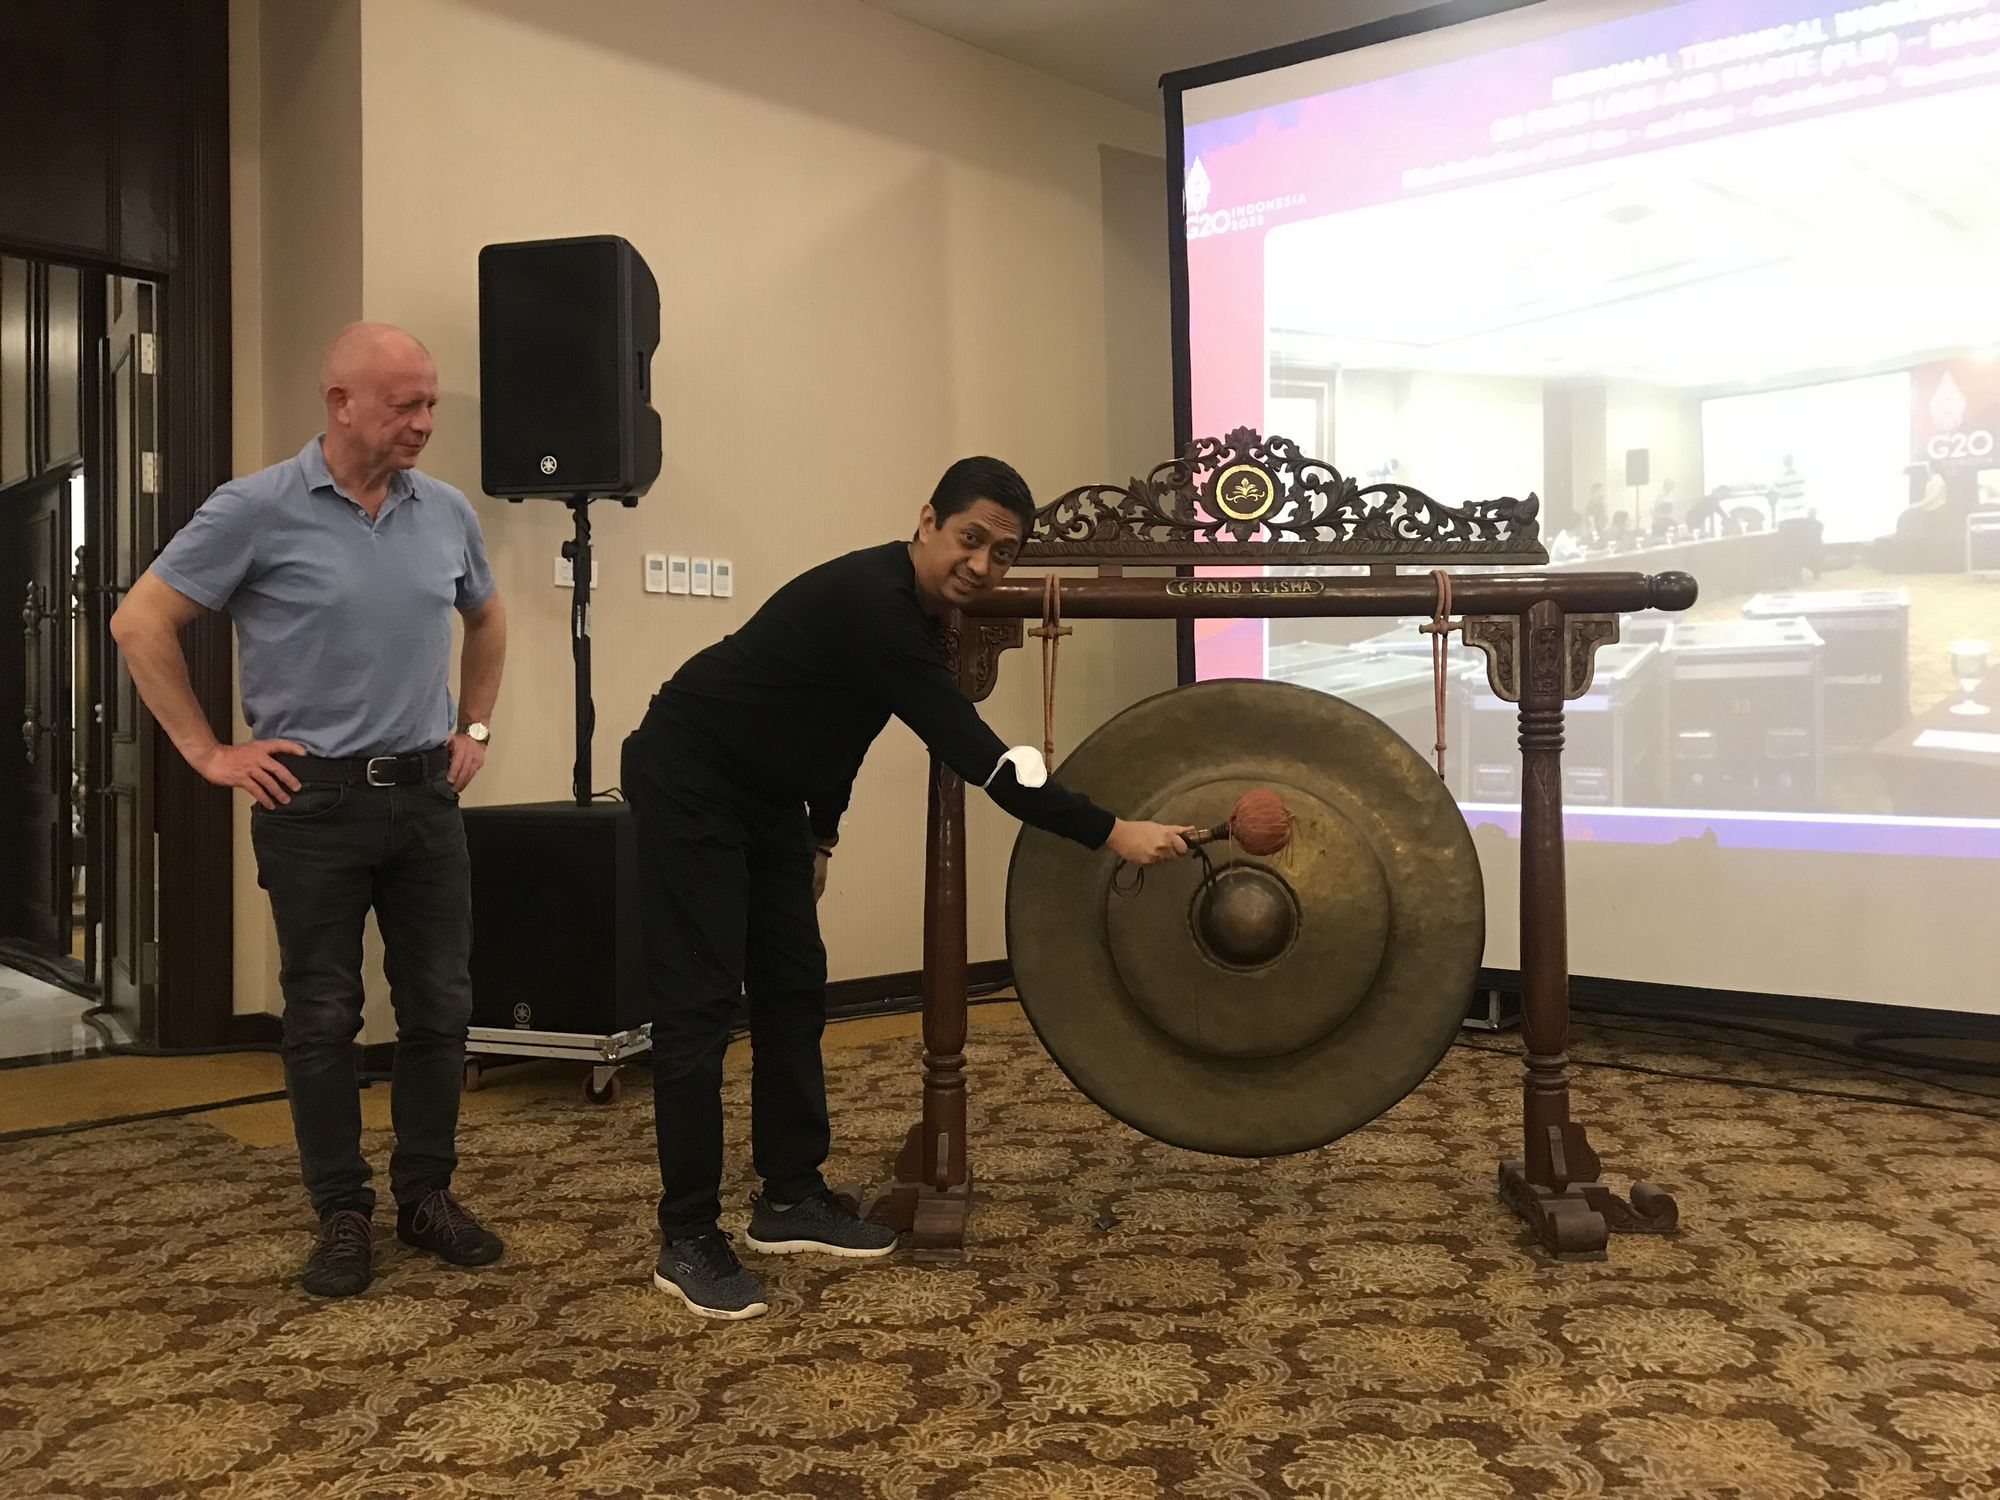 Stefan Lange and Dr Prayudi Syamsuri, director of ICAPRD, testing the gong used for workshop opening ceremony at final rehearsal.